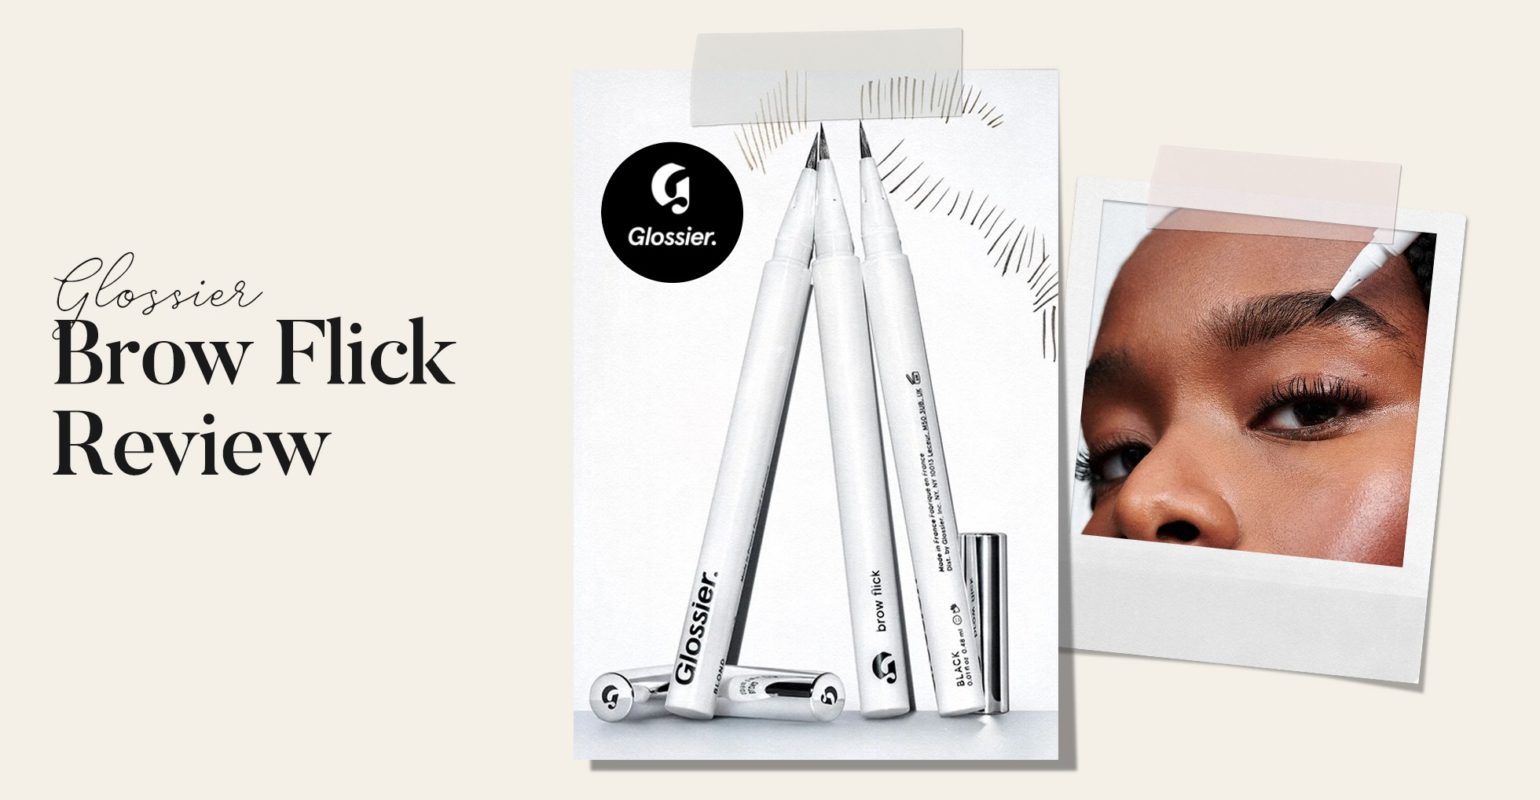 Glossier Brow Flick Review